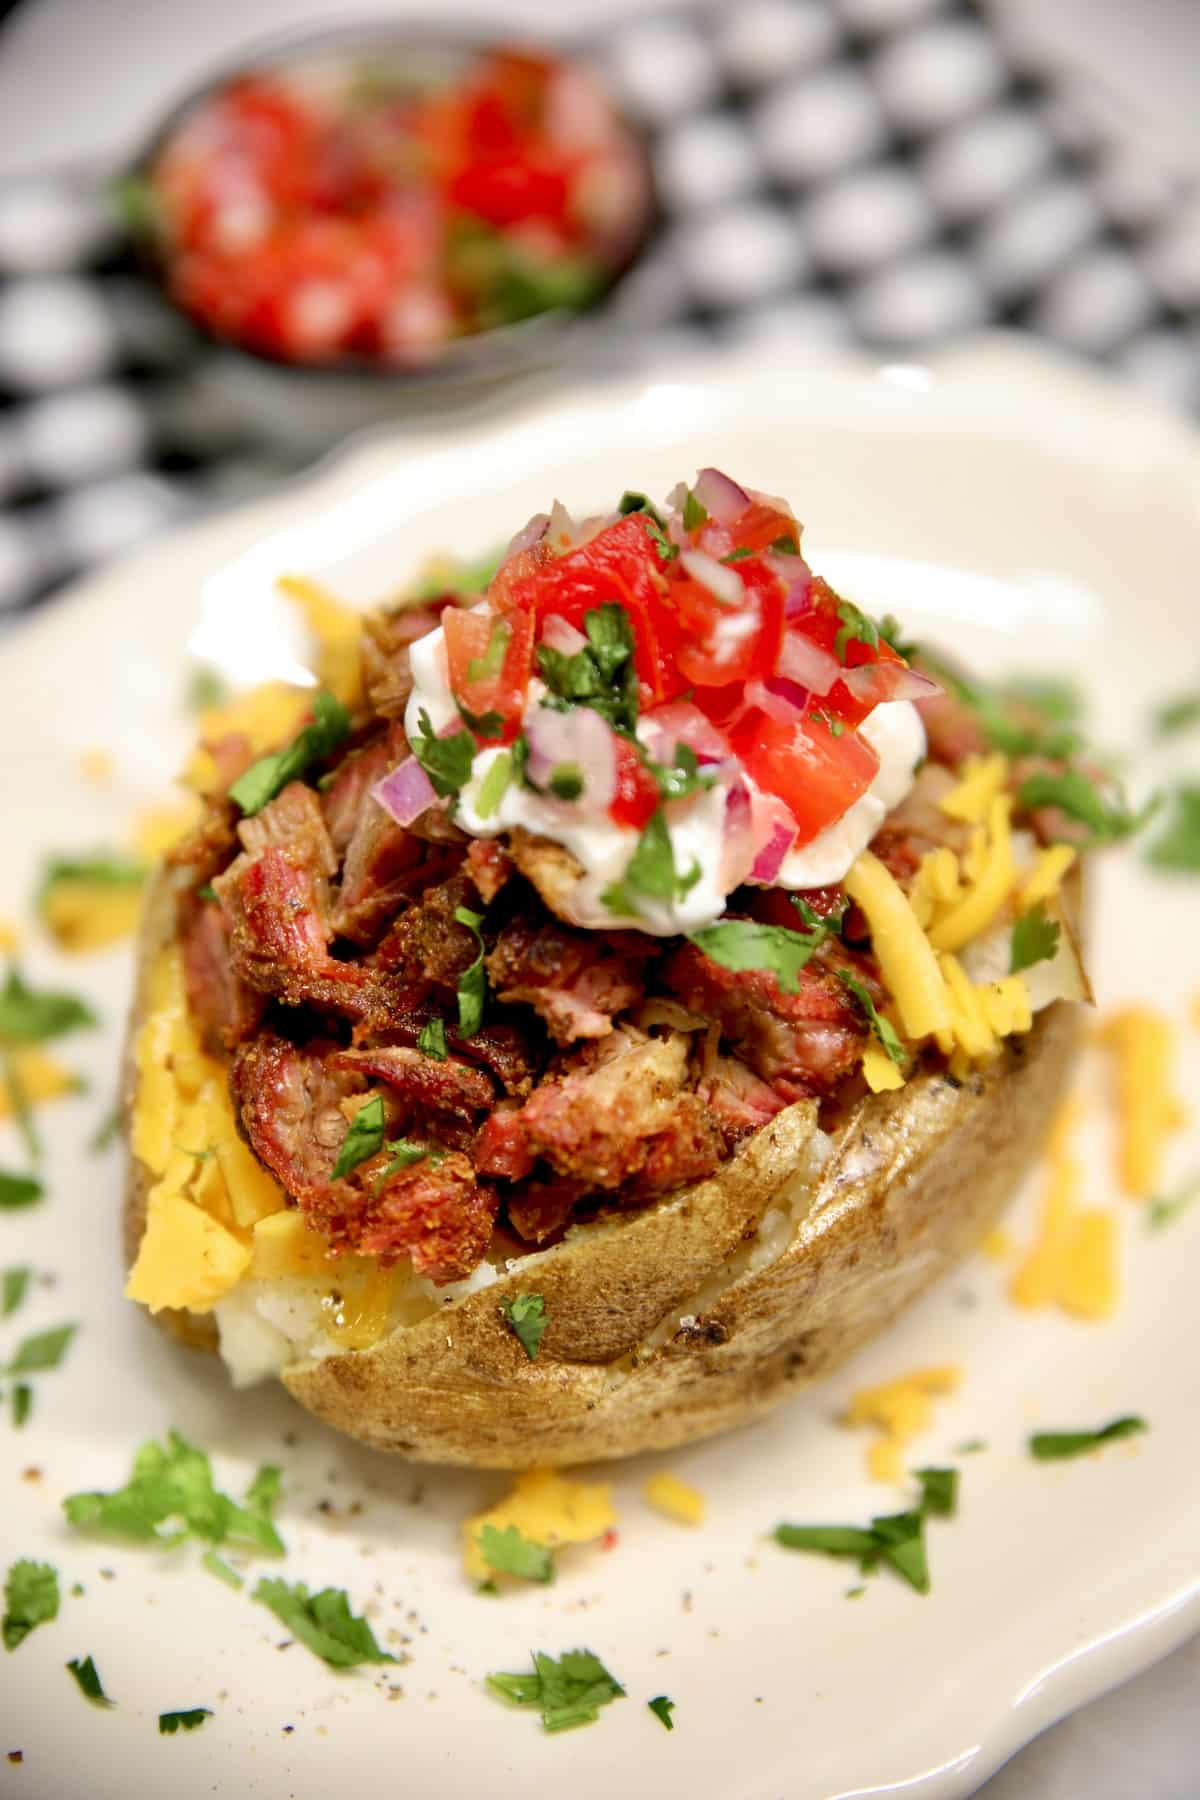 Loaded baked potato with shredded beef, cheese and salsa.